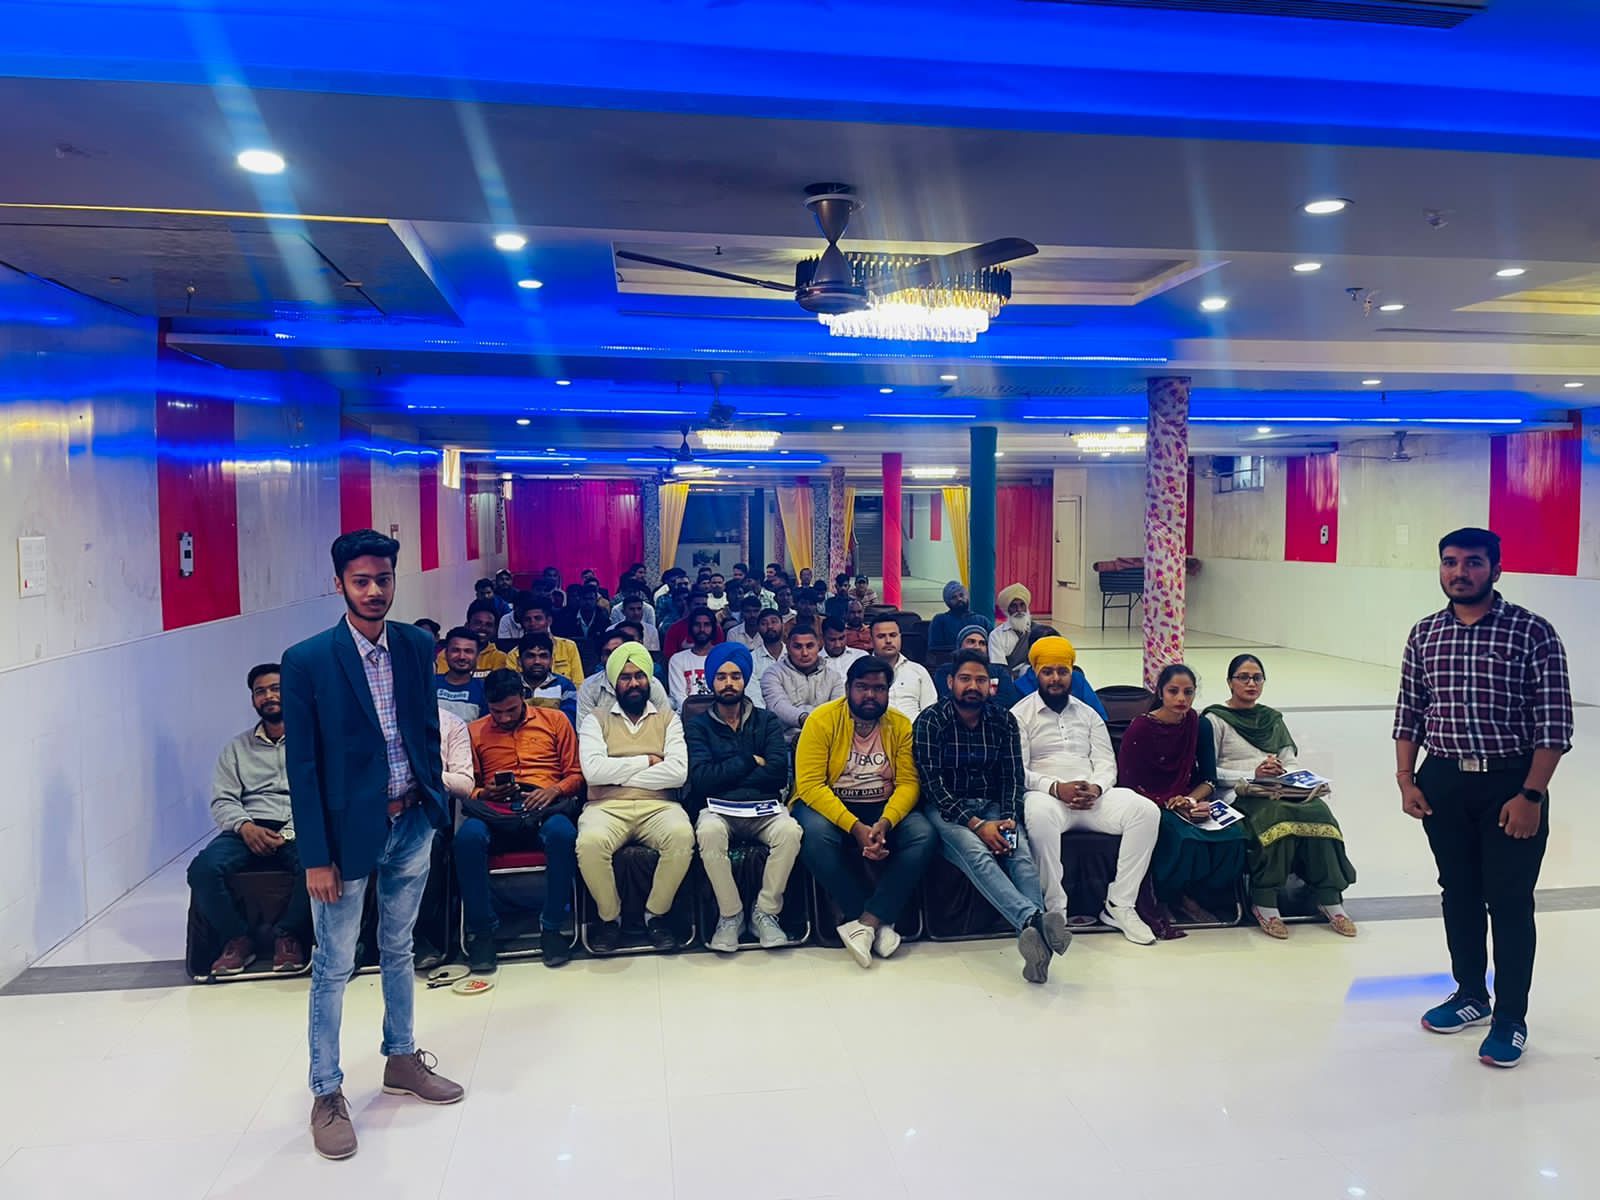 Cashless Master Private Limited Seminar at Assandh, Haryana on 20-February-2022